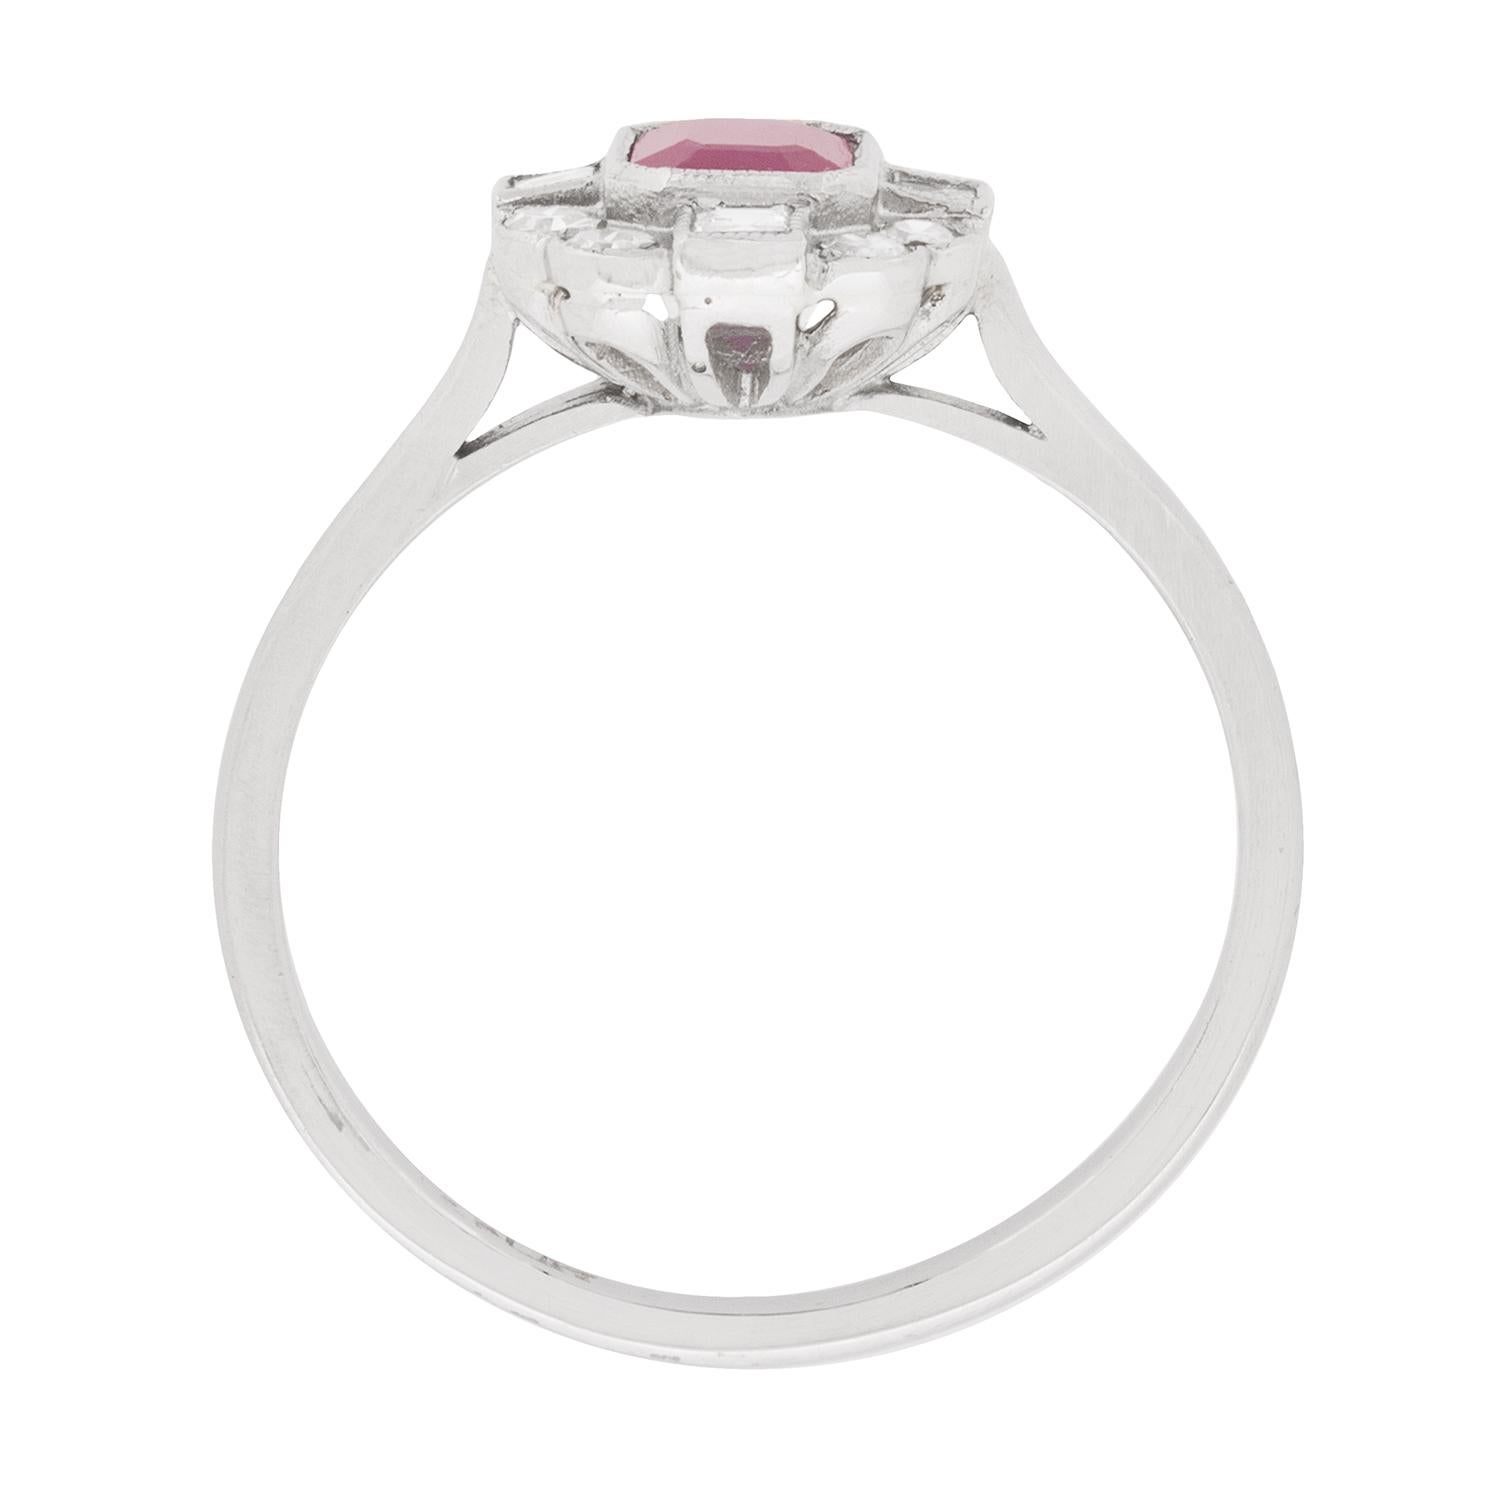 Inspired by the deco era, this cluster ring features a ruby weighing 0.65 carat and is a lovely emerald cut shape. It is a light red, which works in perfect harmony with the cluster of diamonds surrounding. The diamonds are a mix of carre cuts, set